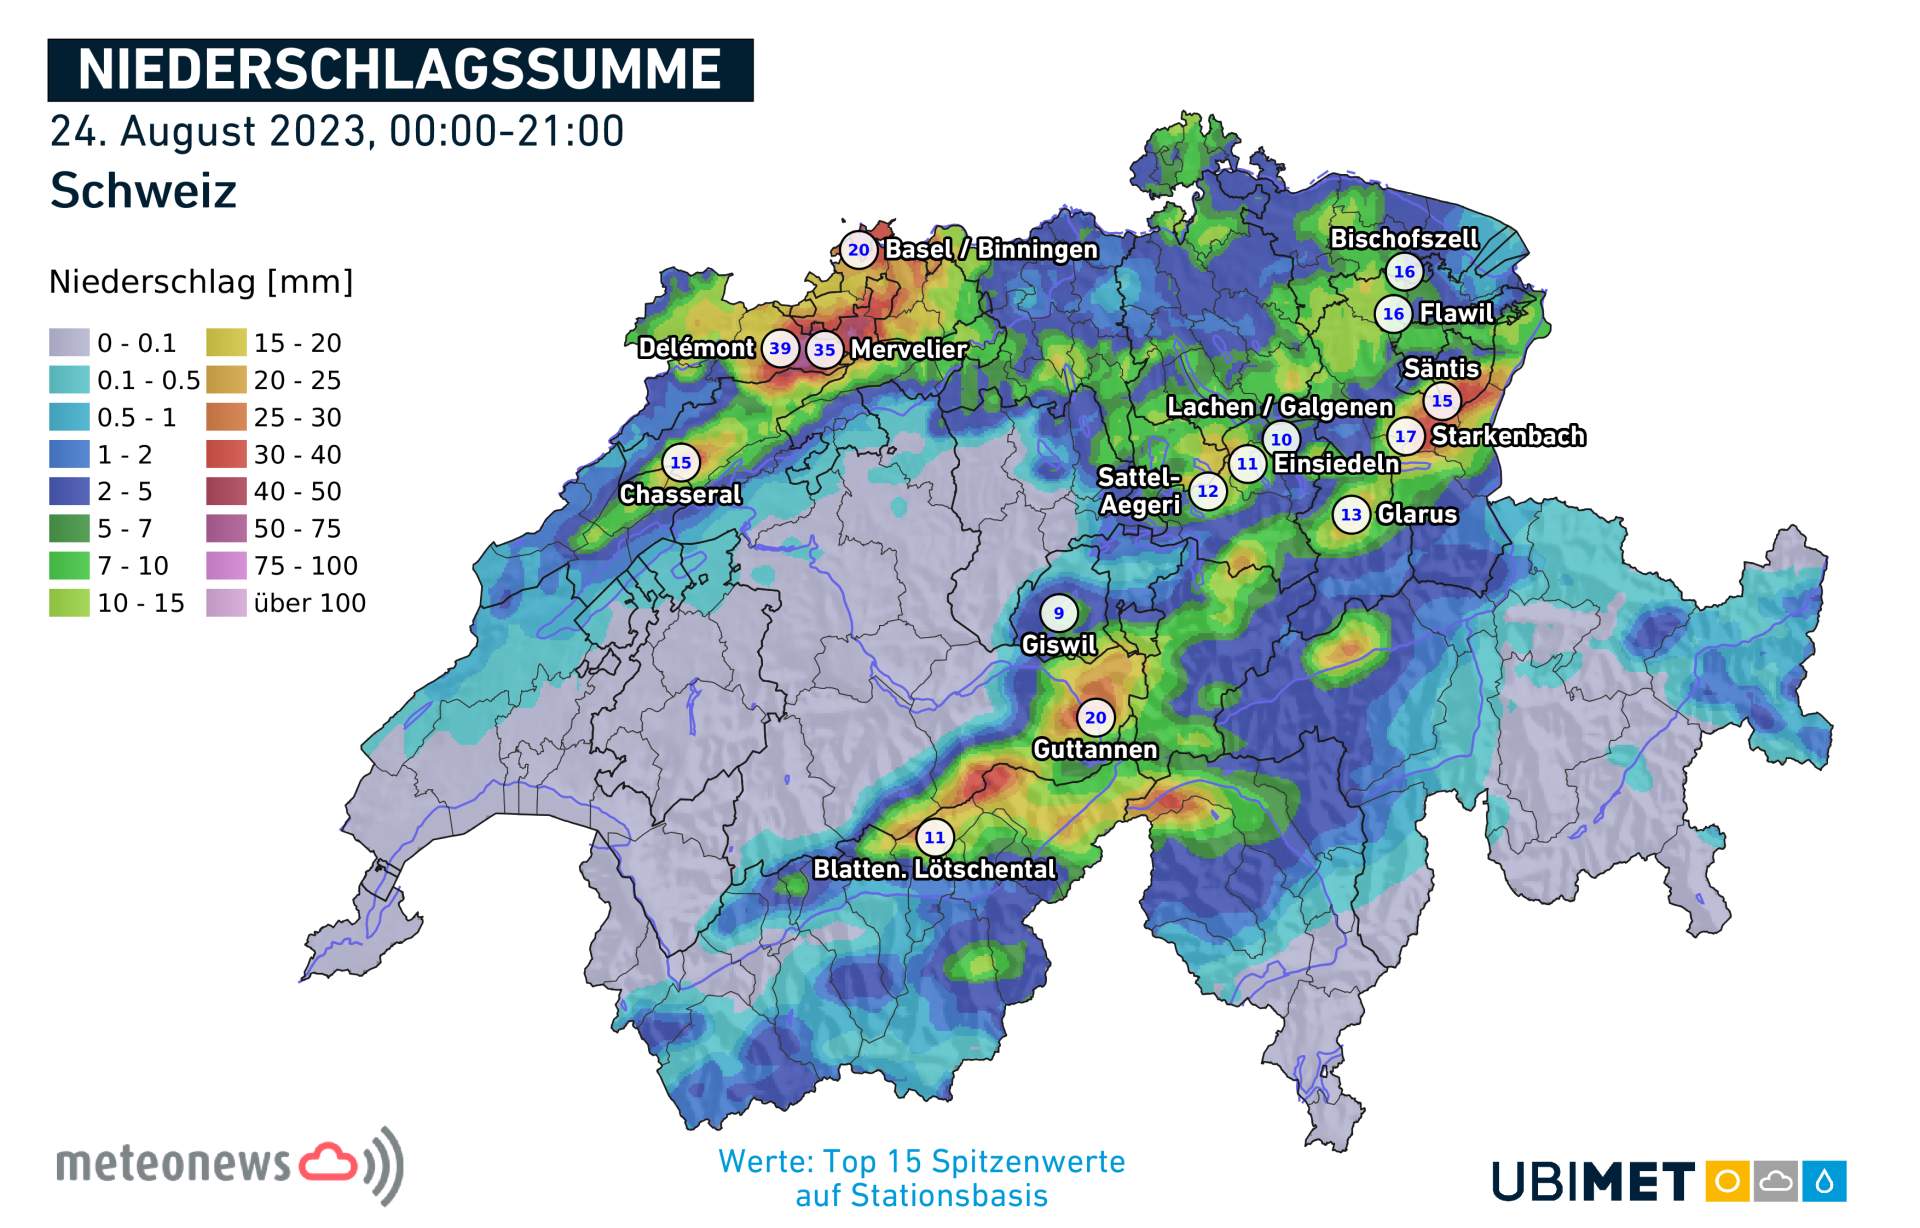 Fig. 2: Precipitation total from 24 August 2023 to 9 pm. Northwestern Switzerland and regions along the Alps and Pre-Alps were most affected.; Source: UBIMET, MeteoNews